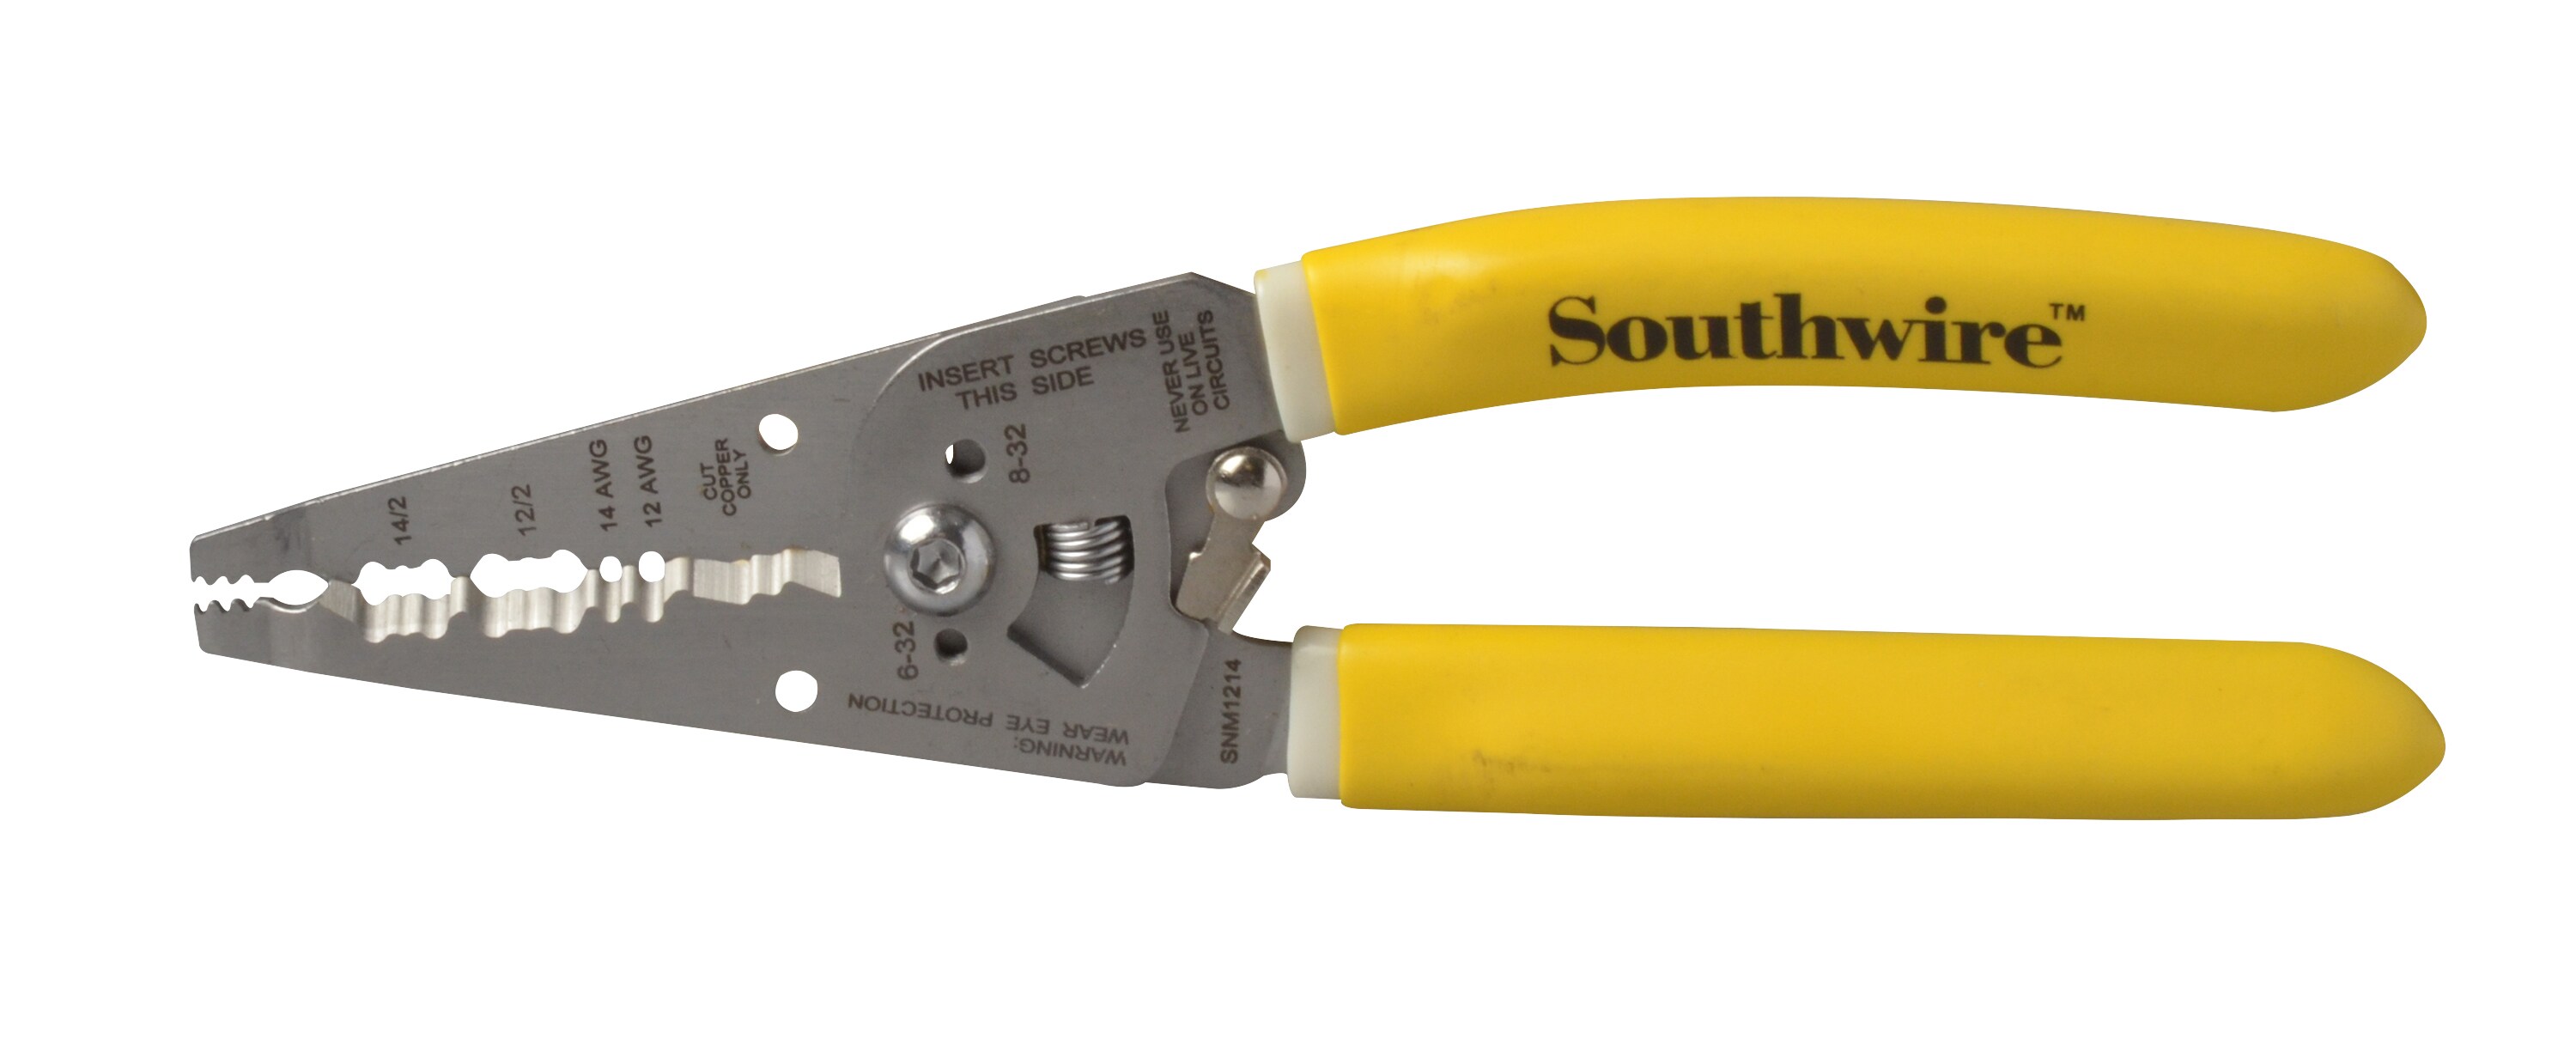 Southwire SNM1214 NEW Romex Wire Stripper 